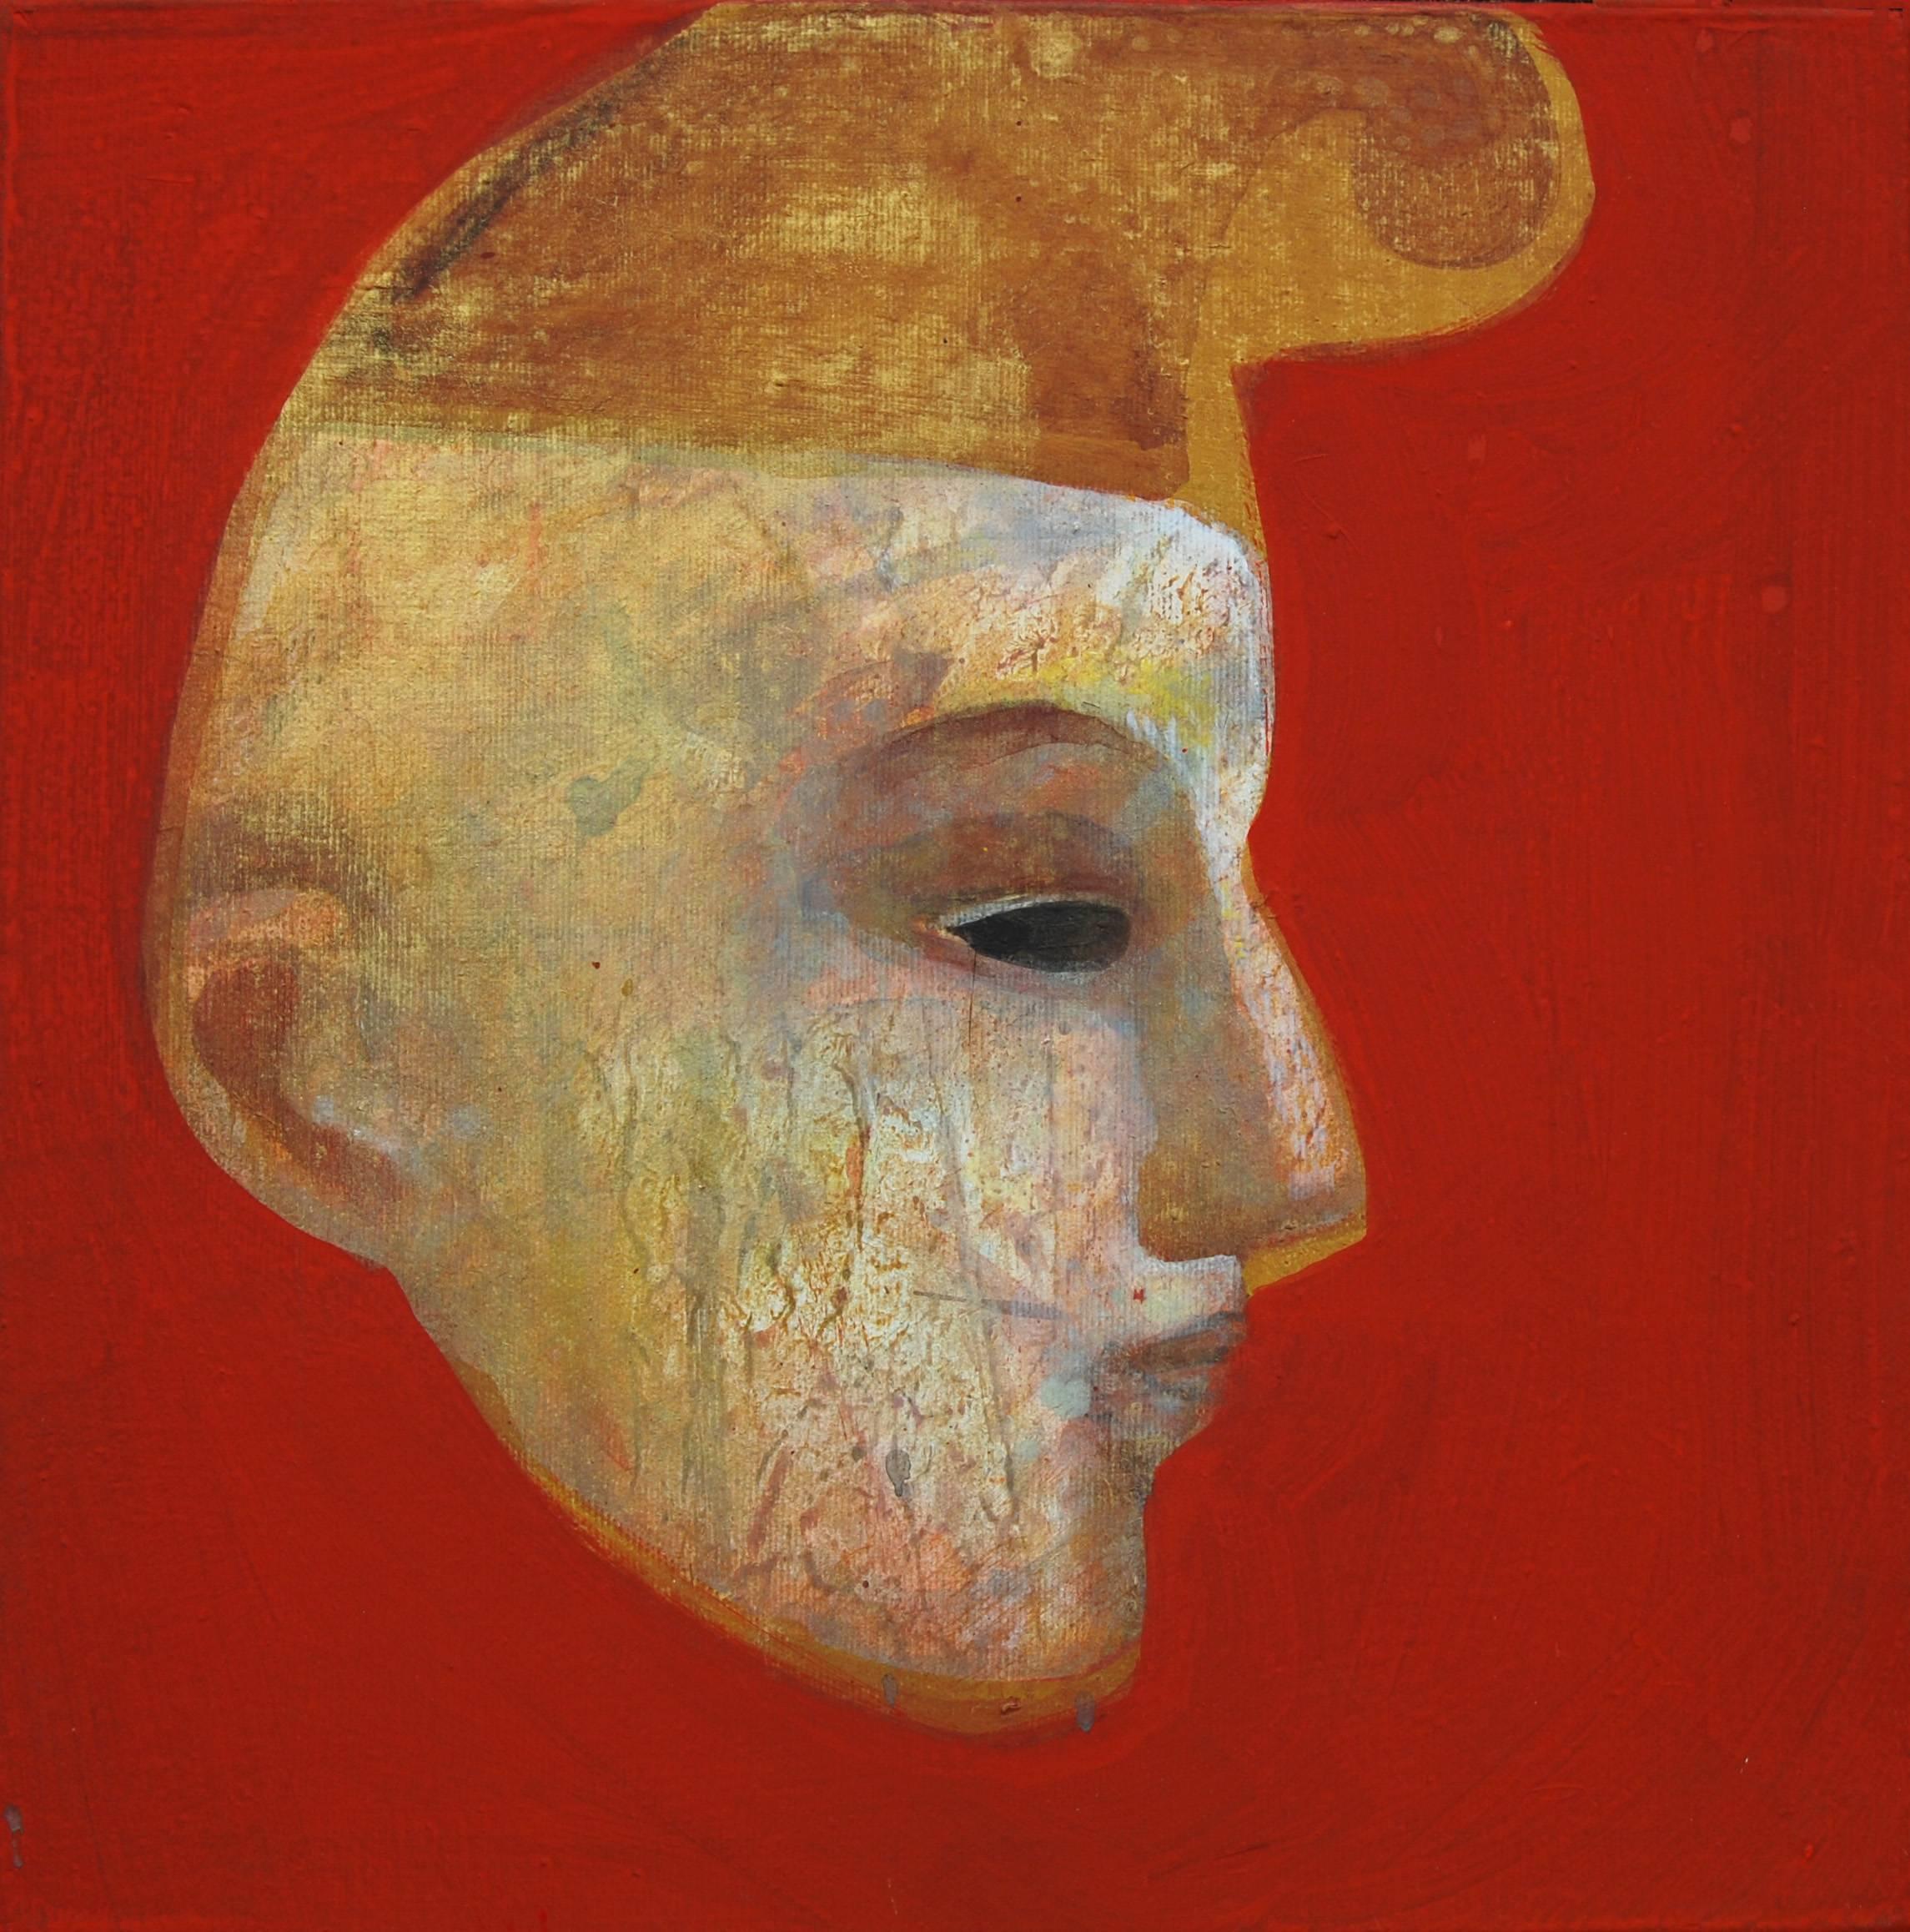 Tapas Ghosal Figurative Painting - Untiled, Acrylic on Canvas by Contemporary Artist "In Stock"